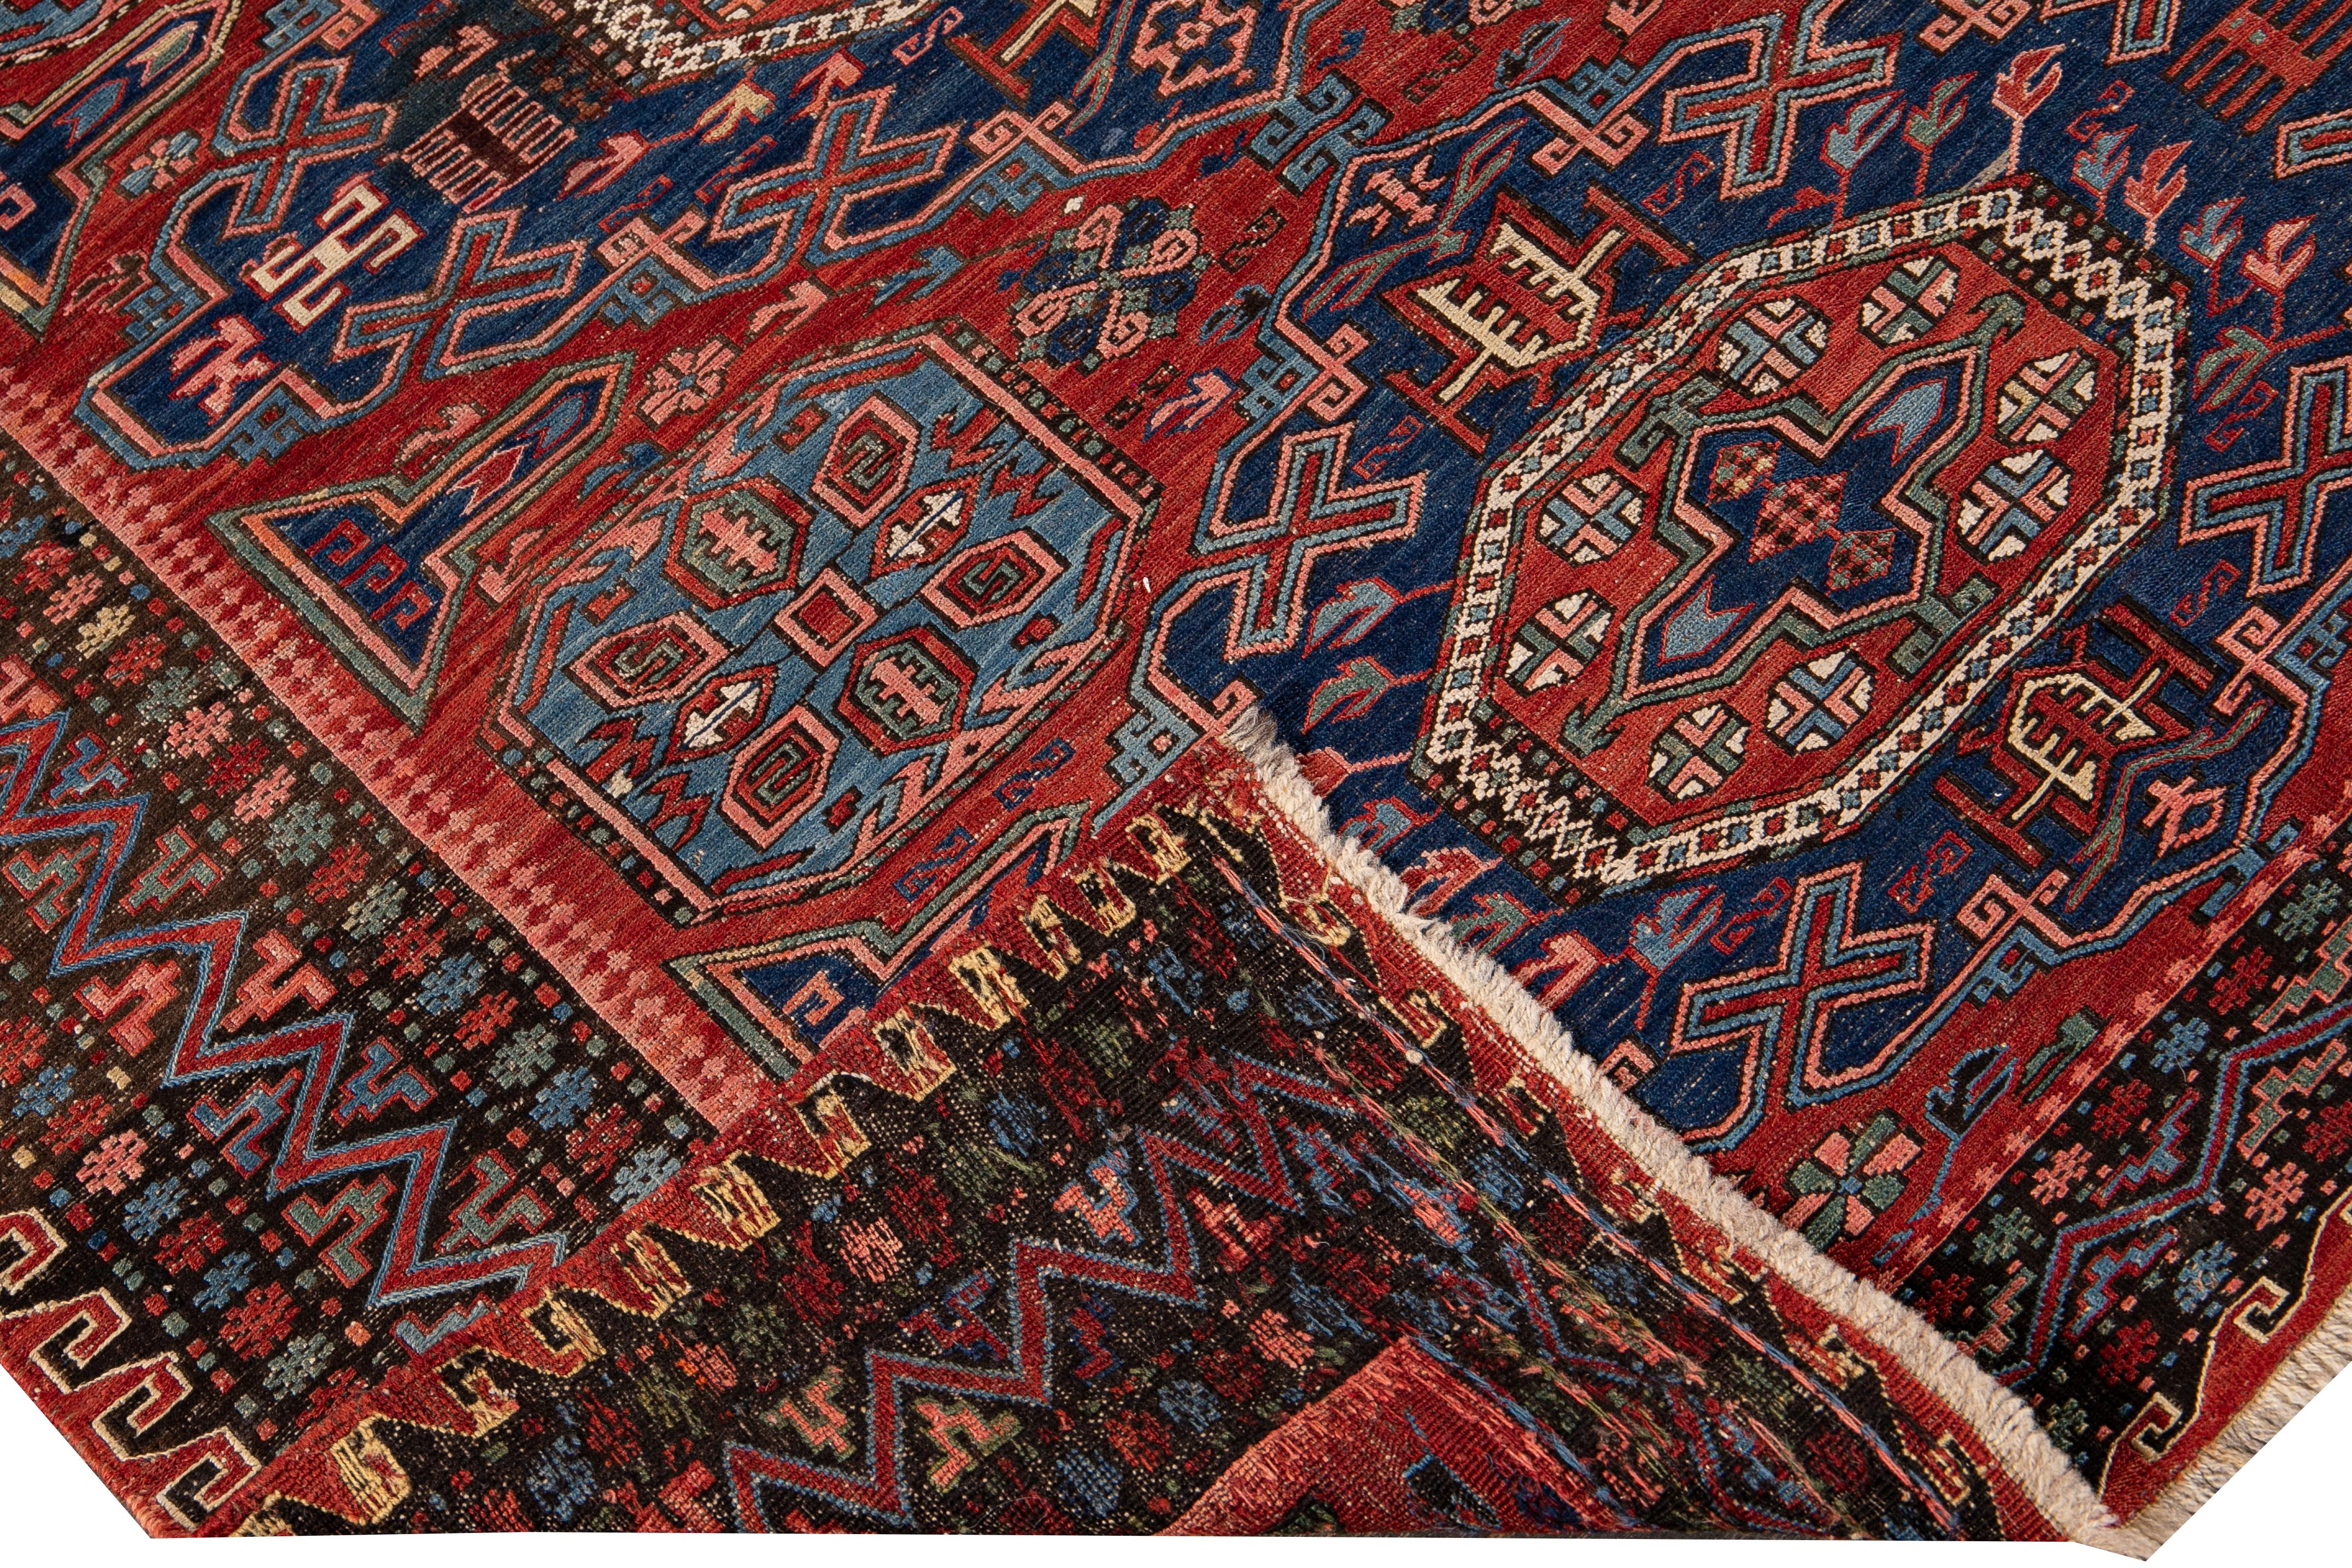 Beautiful vintage Sumakh hand-knotted wool rug with a red and blue field. This Sumakh rug has multicolor accents in a gorgeous all-over geometric medallion motif design.

This rug measures 5' x 6'9